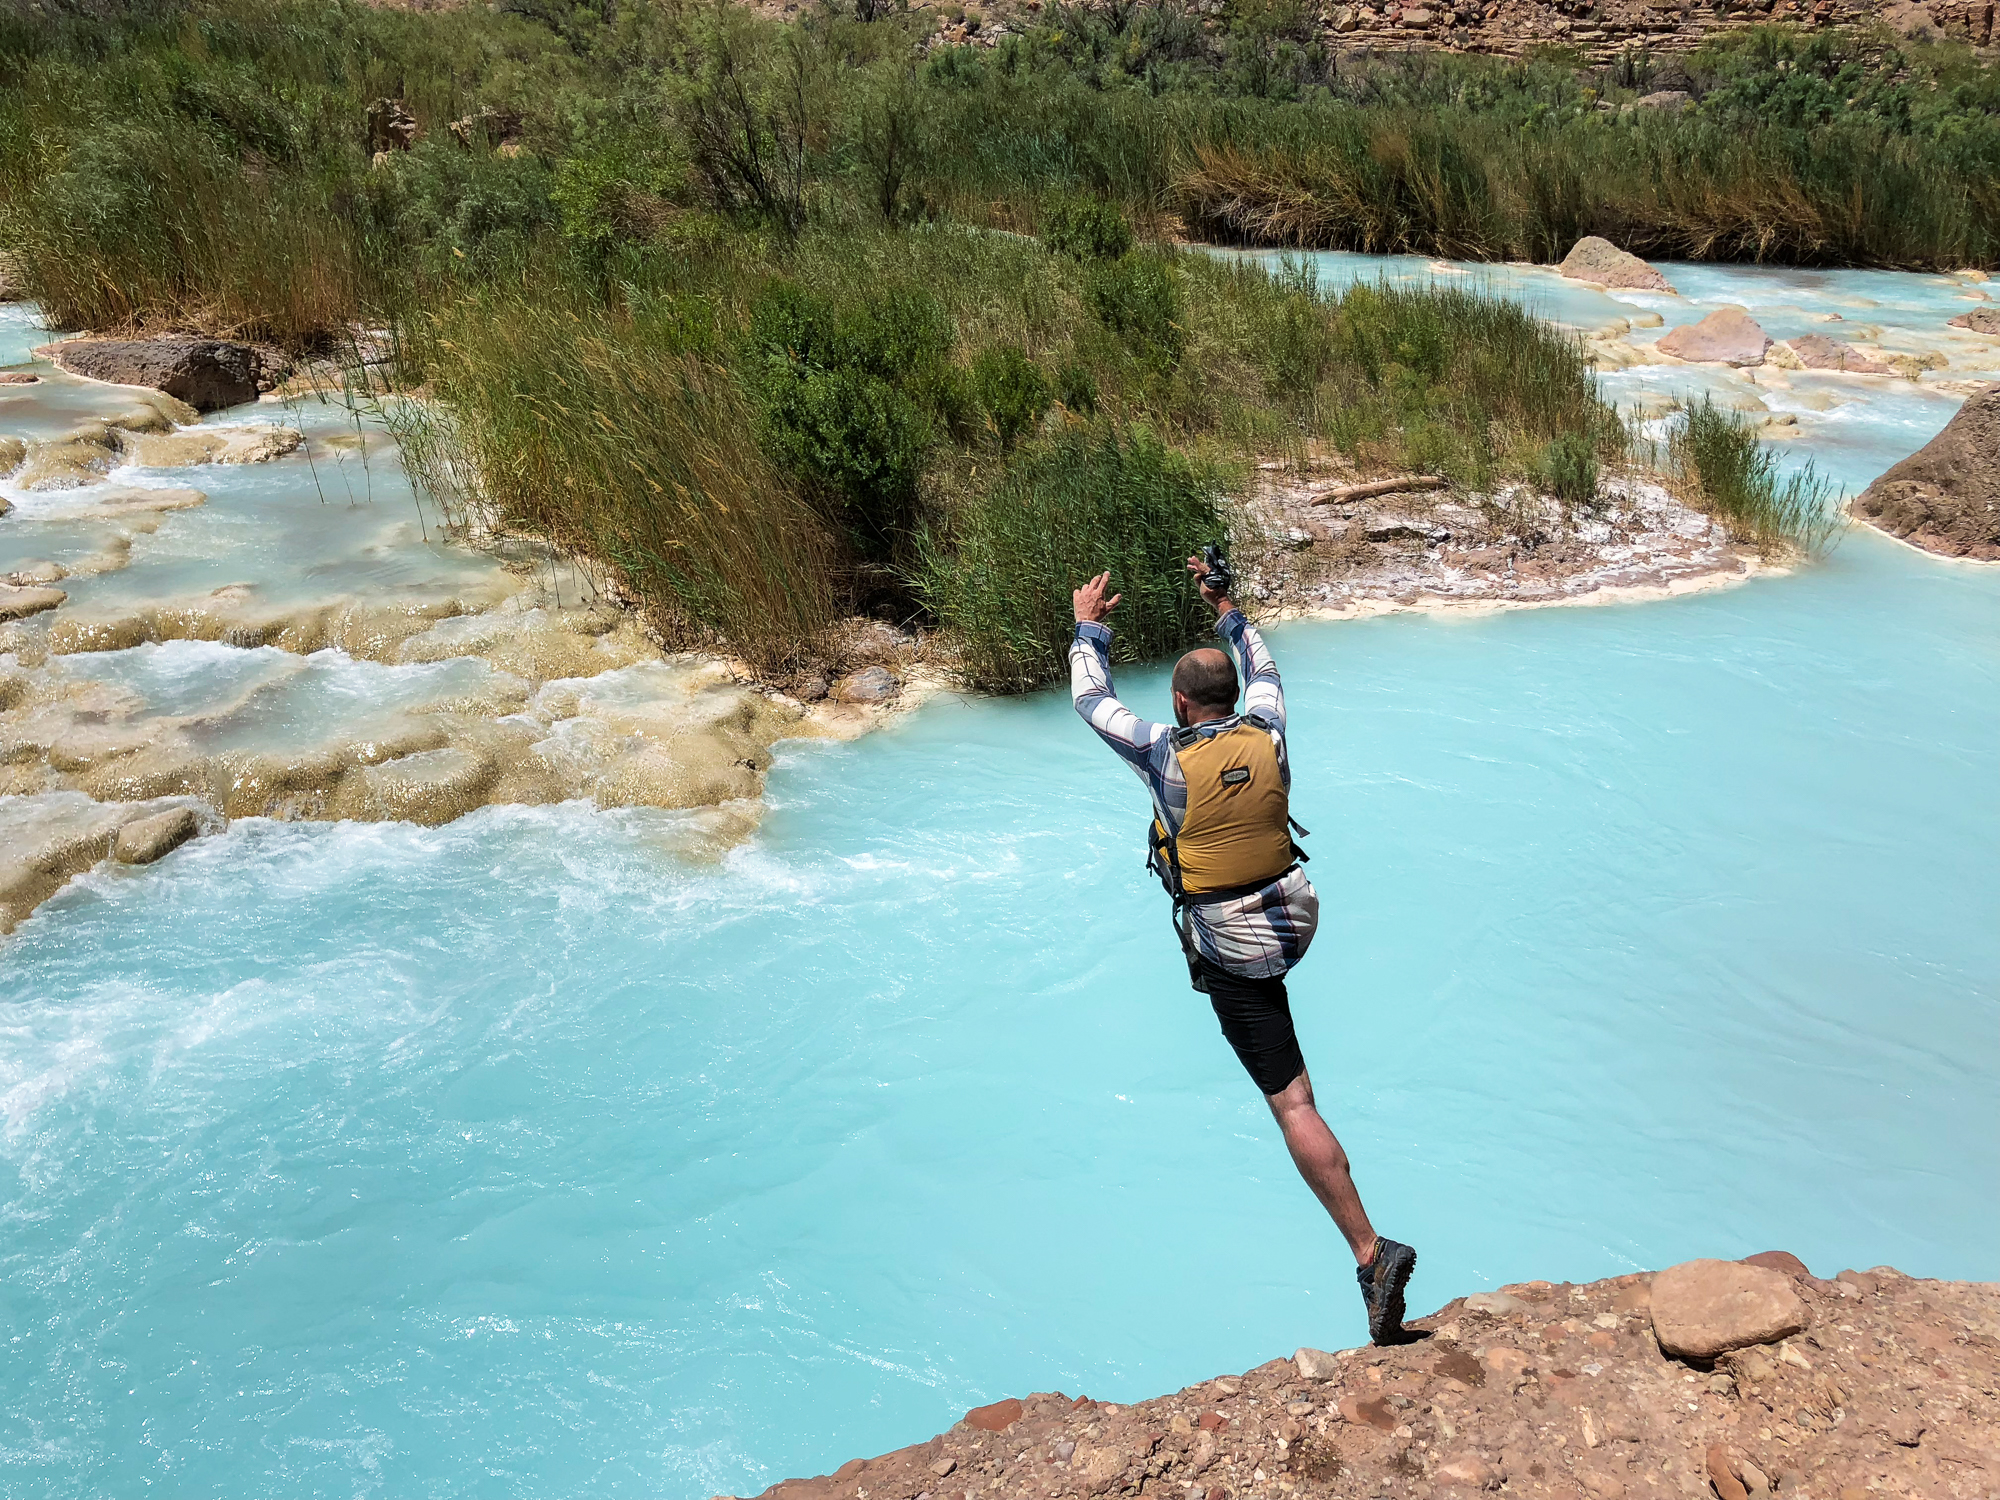  Leaping into the Little Colorado River 